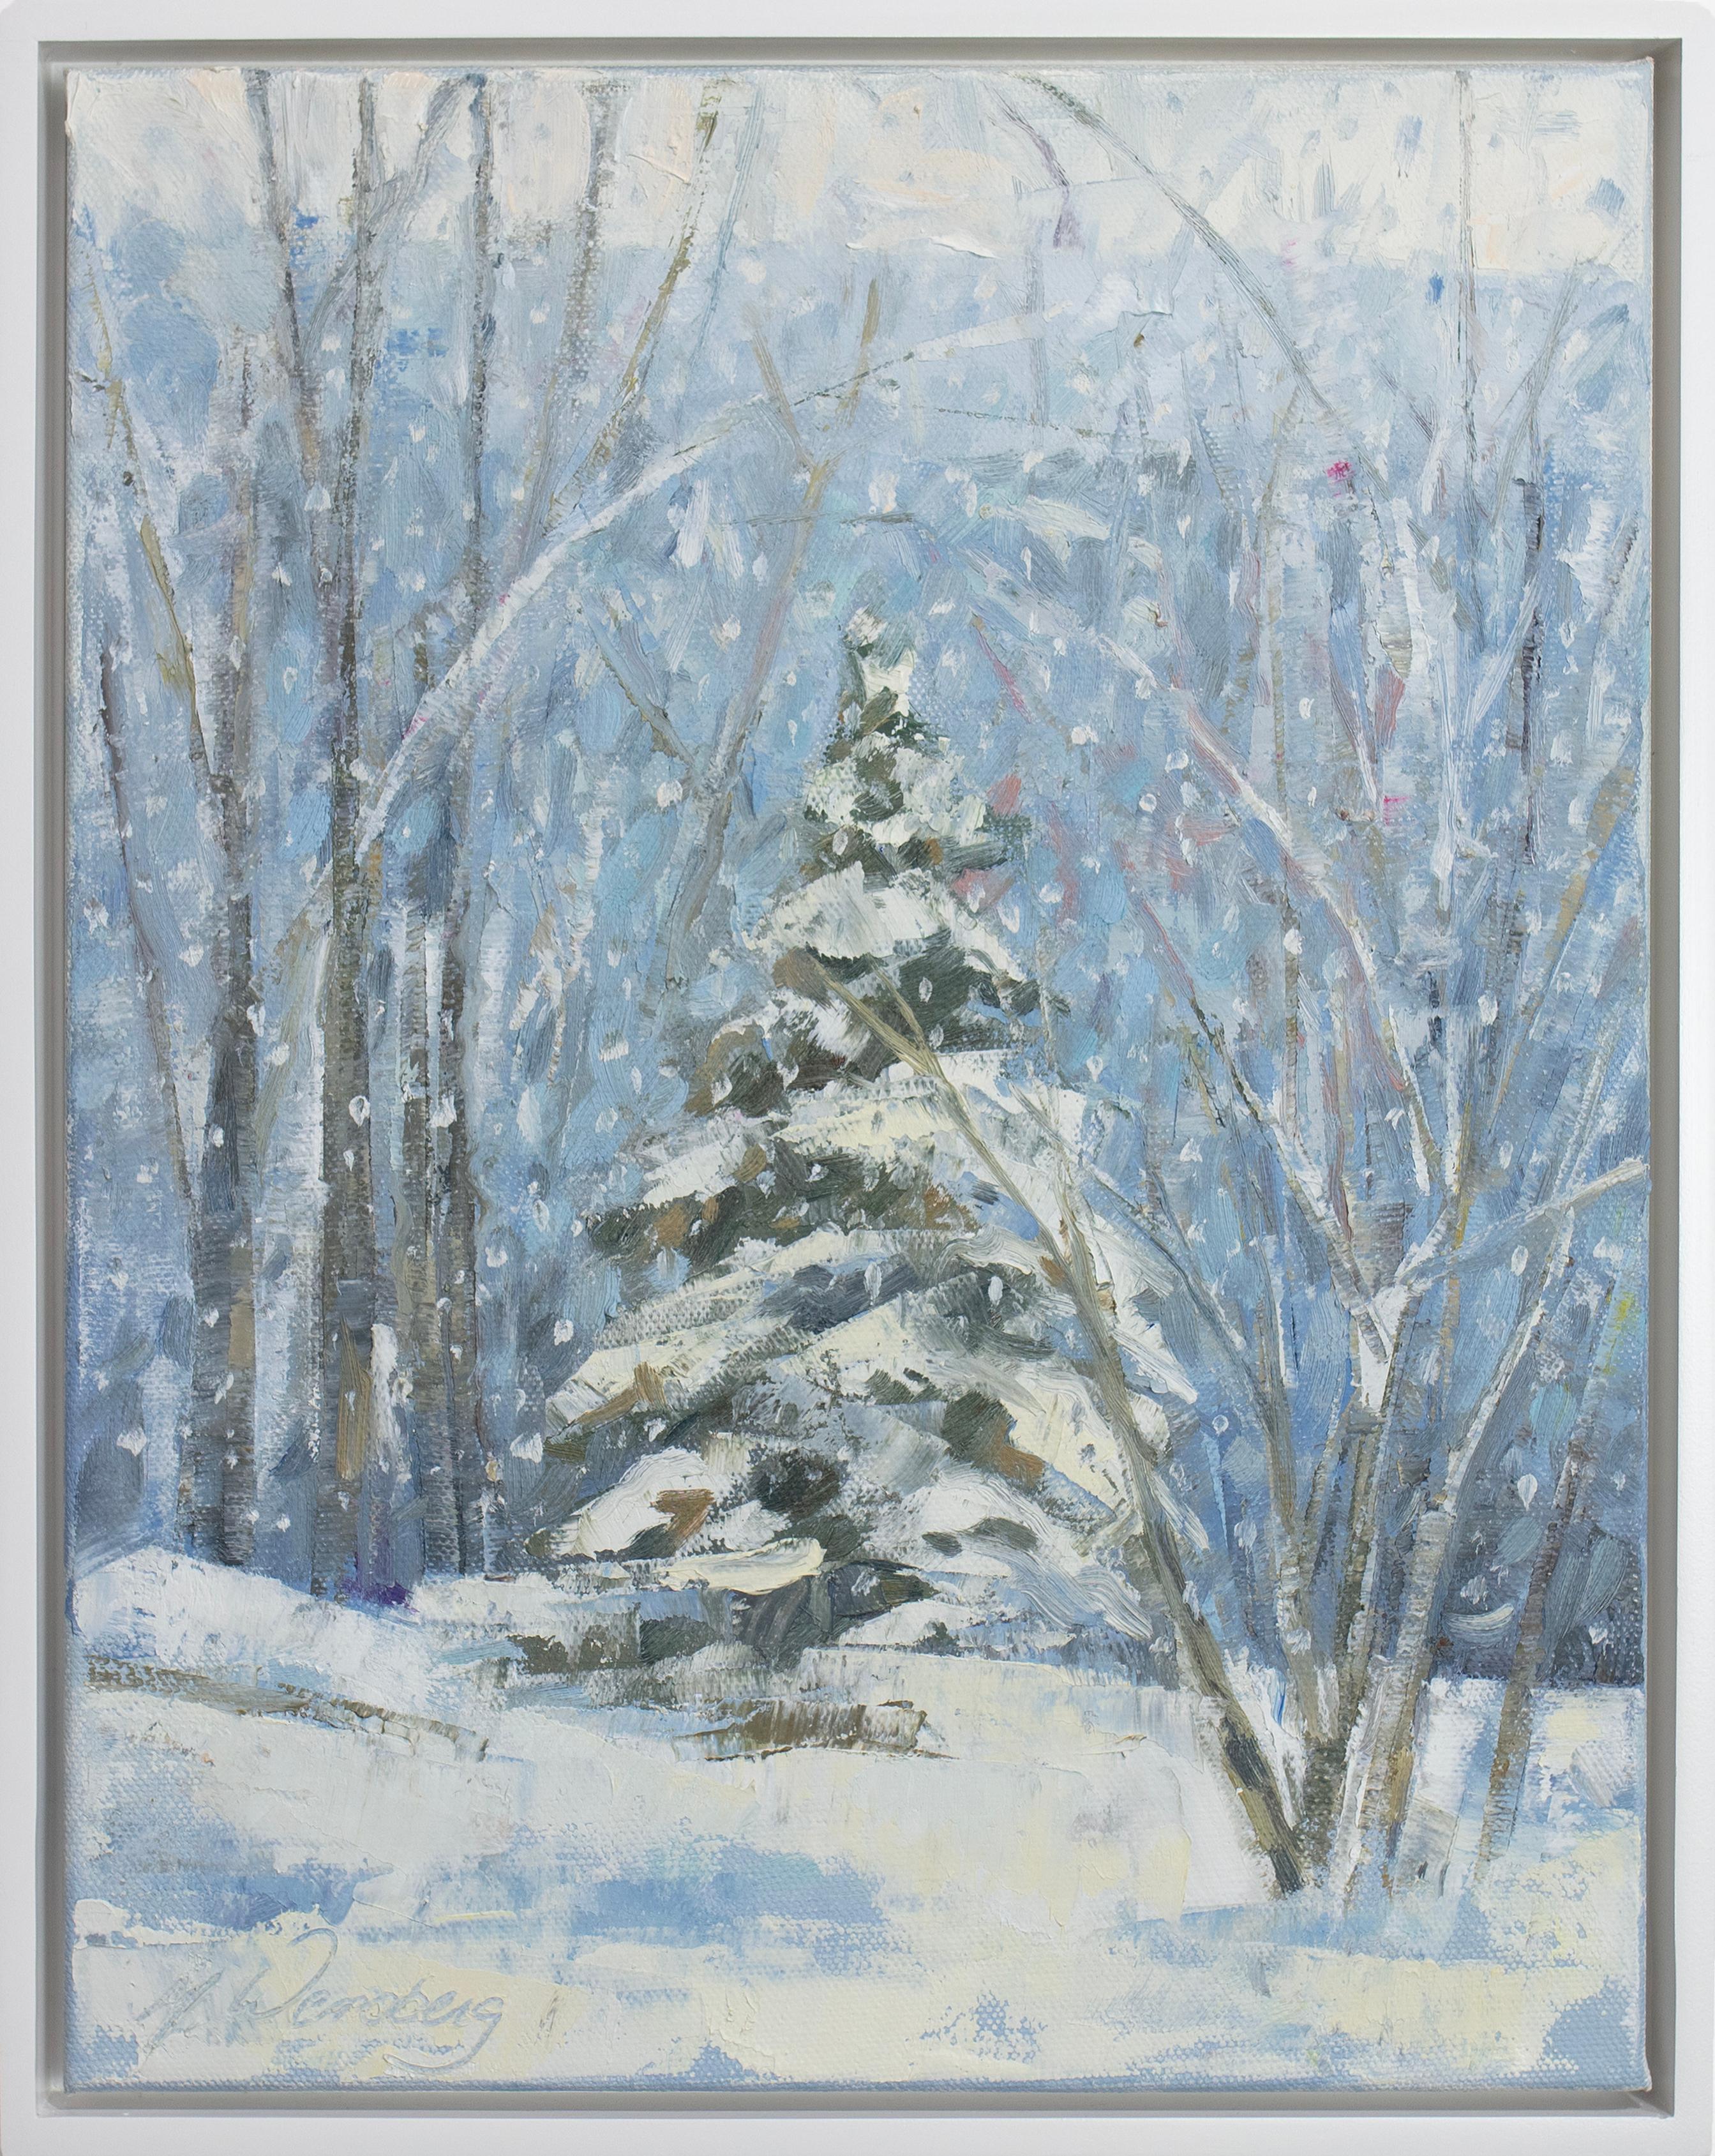 This impressionistic winter landscape painting by Molly Doe Wensberg features a cool blue, green, and white palette. The artist captures a scene of an evergreen tree covered in snow, surrounded by a snow-covered ground and bare trees surrounding it.